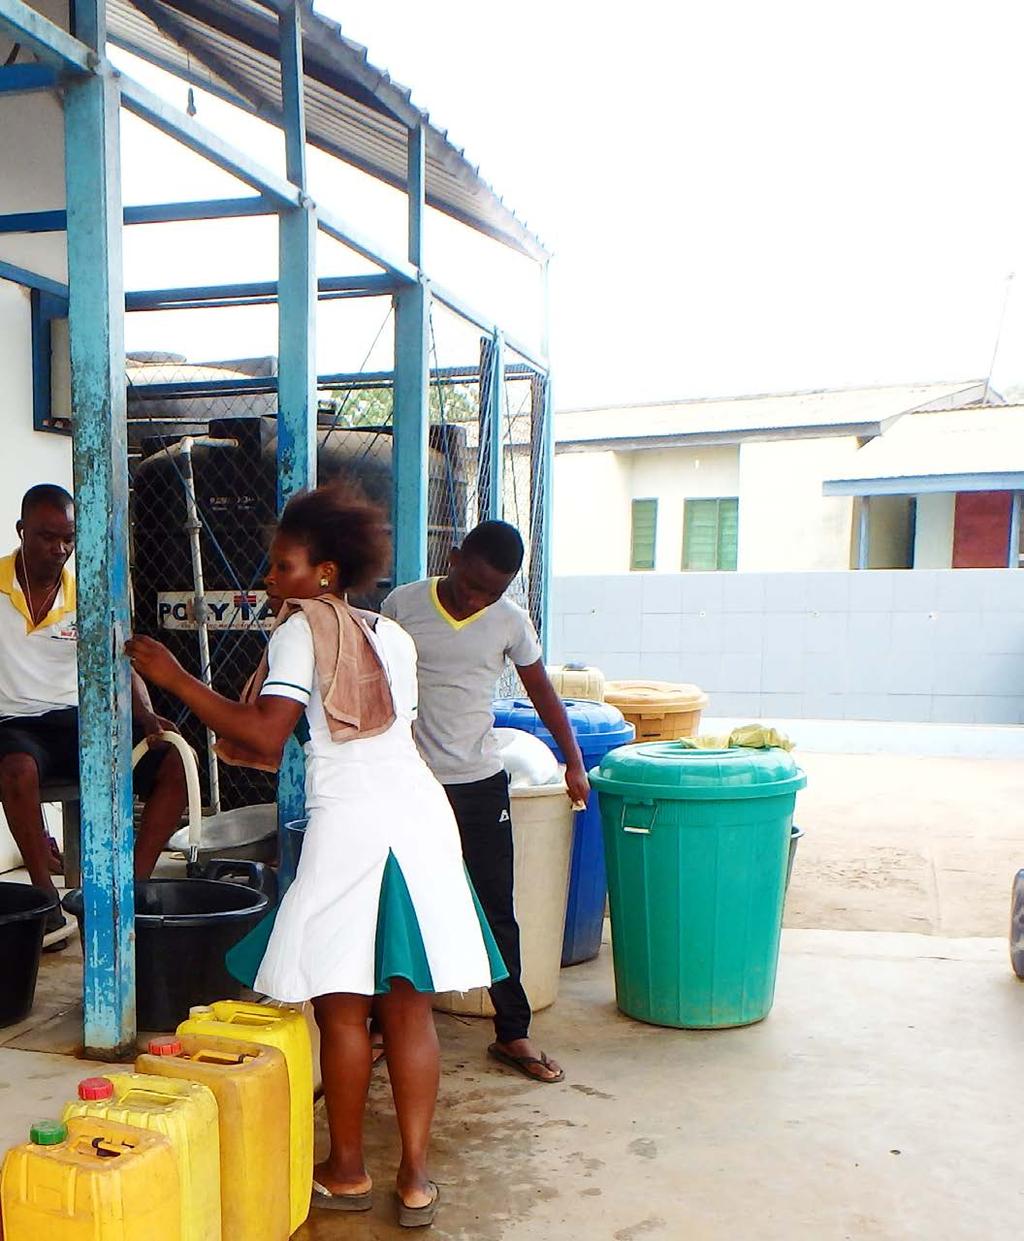 Water kiosk in East Legon Innovation is flourishing in Ghana, with Non-Government Organisations (NGOs) and United Nations agencies working with community